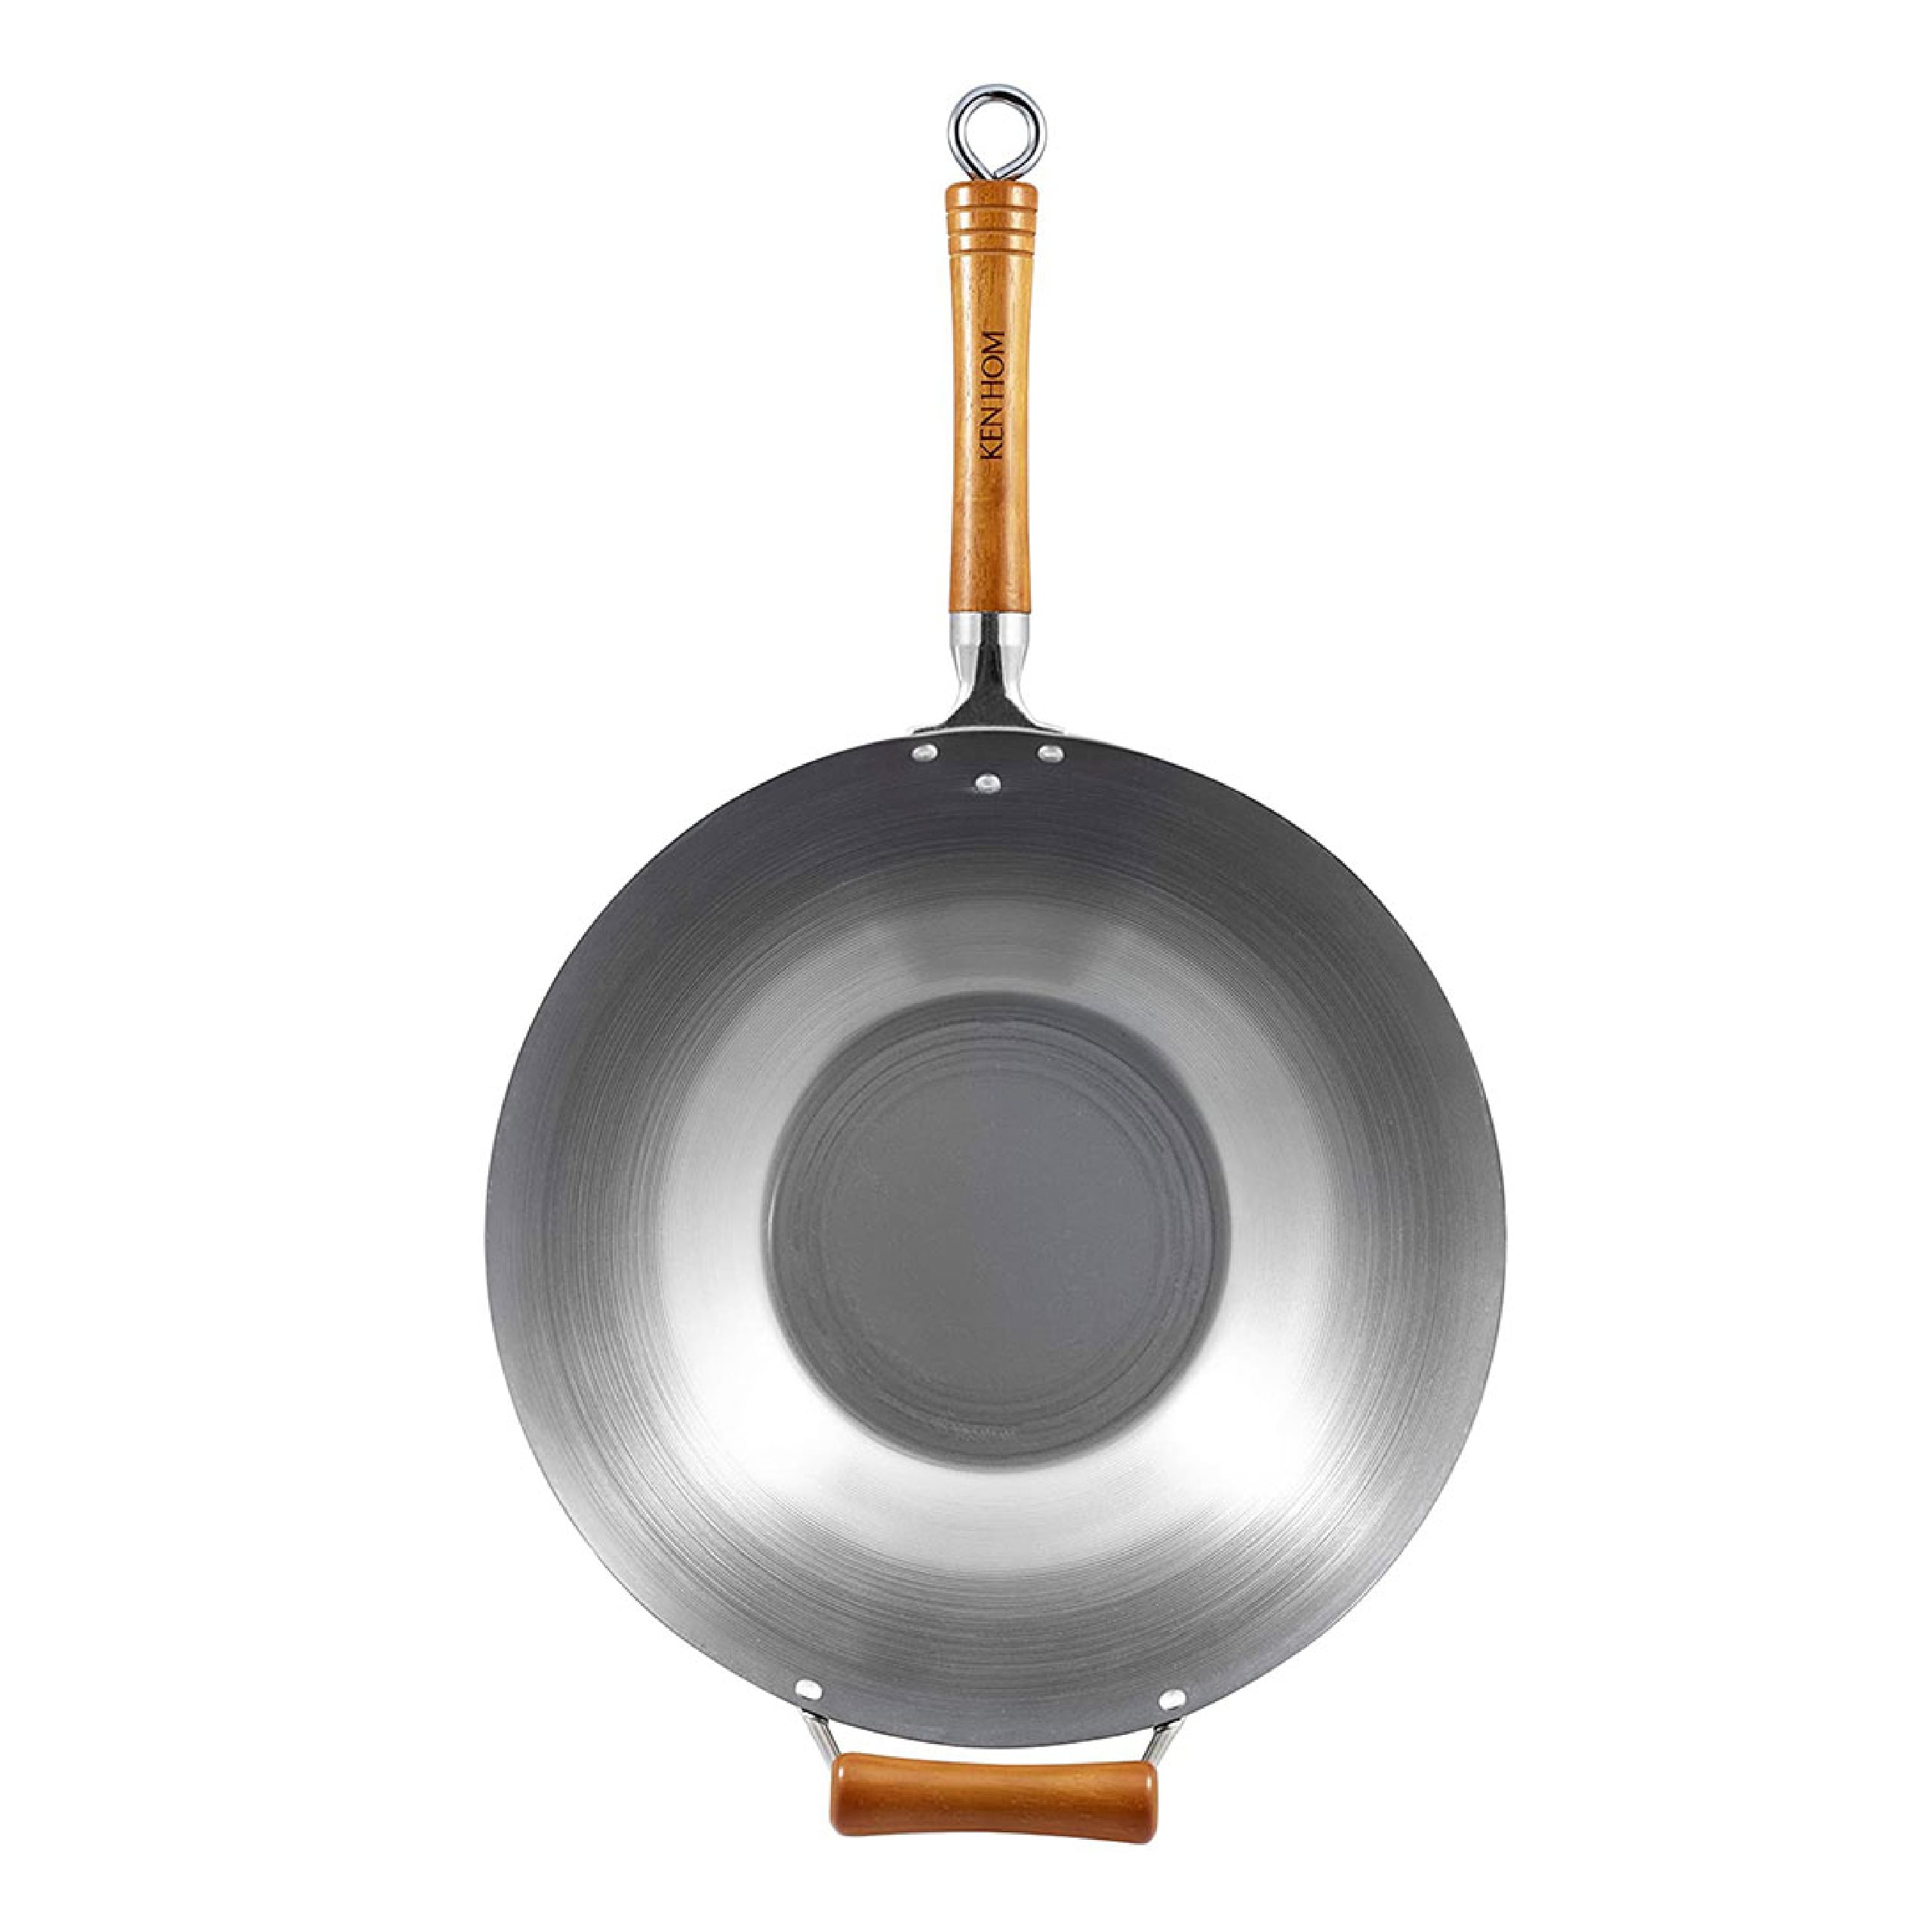 Comal Stainless Steel 22 Acero Inoxidable Concave Outdoors Stir Fry Heavy  Duty Comal Para Freir